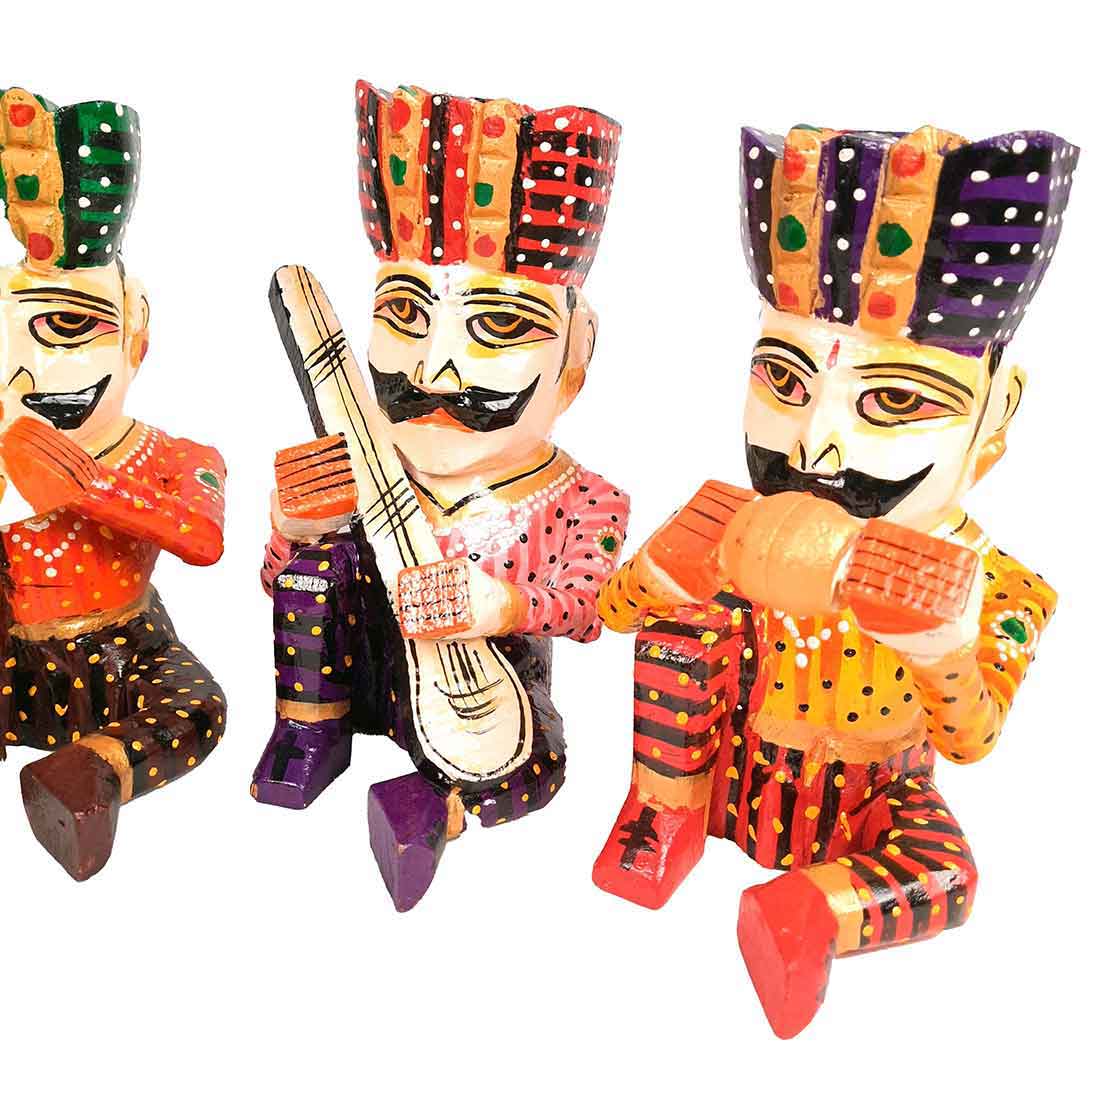 Rajasthani Musician Showpiece - For Table & Home Decor - 9 Inch -Set of 5